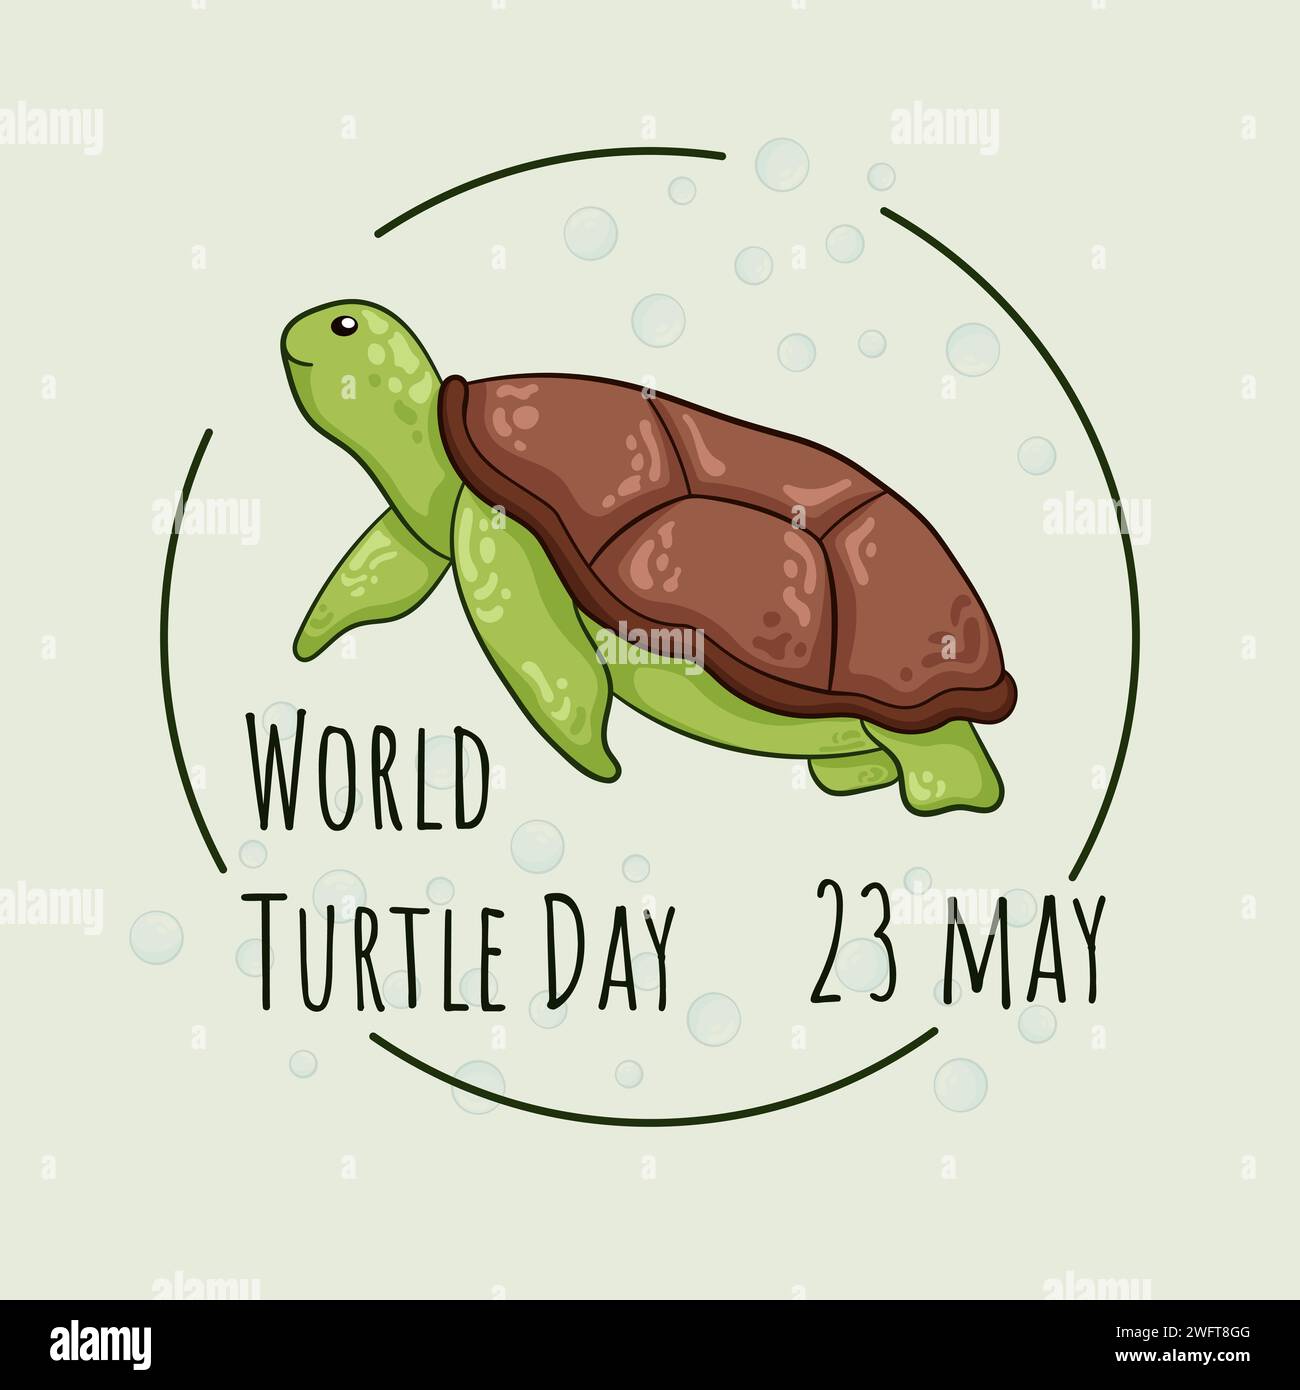 World Turtle Day on May 23. Graphic illustration for poster, banner, social media, card. Vector art isolated on a green background. Stock Vector